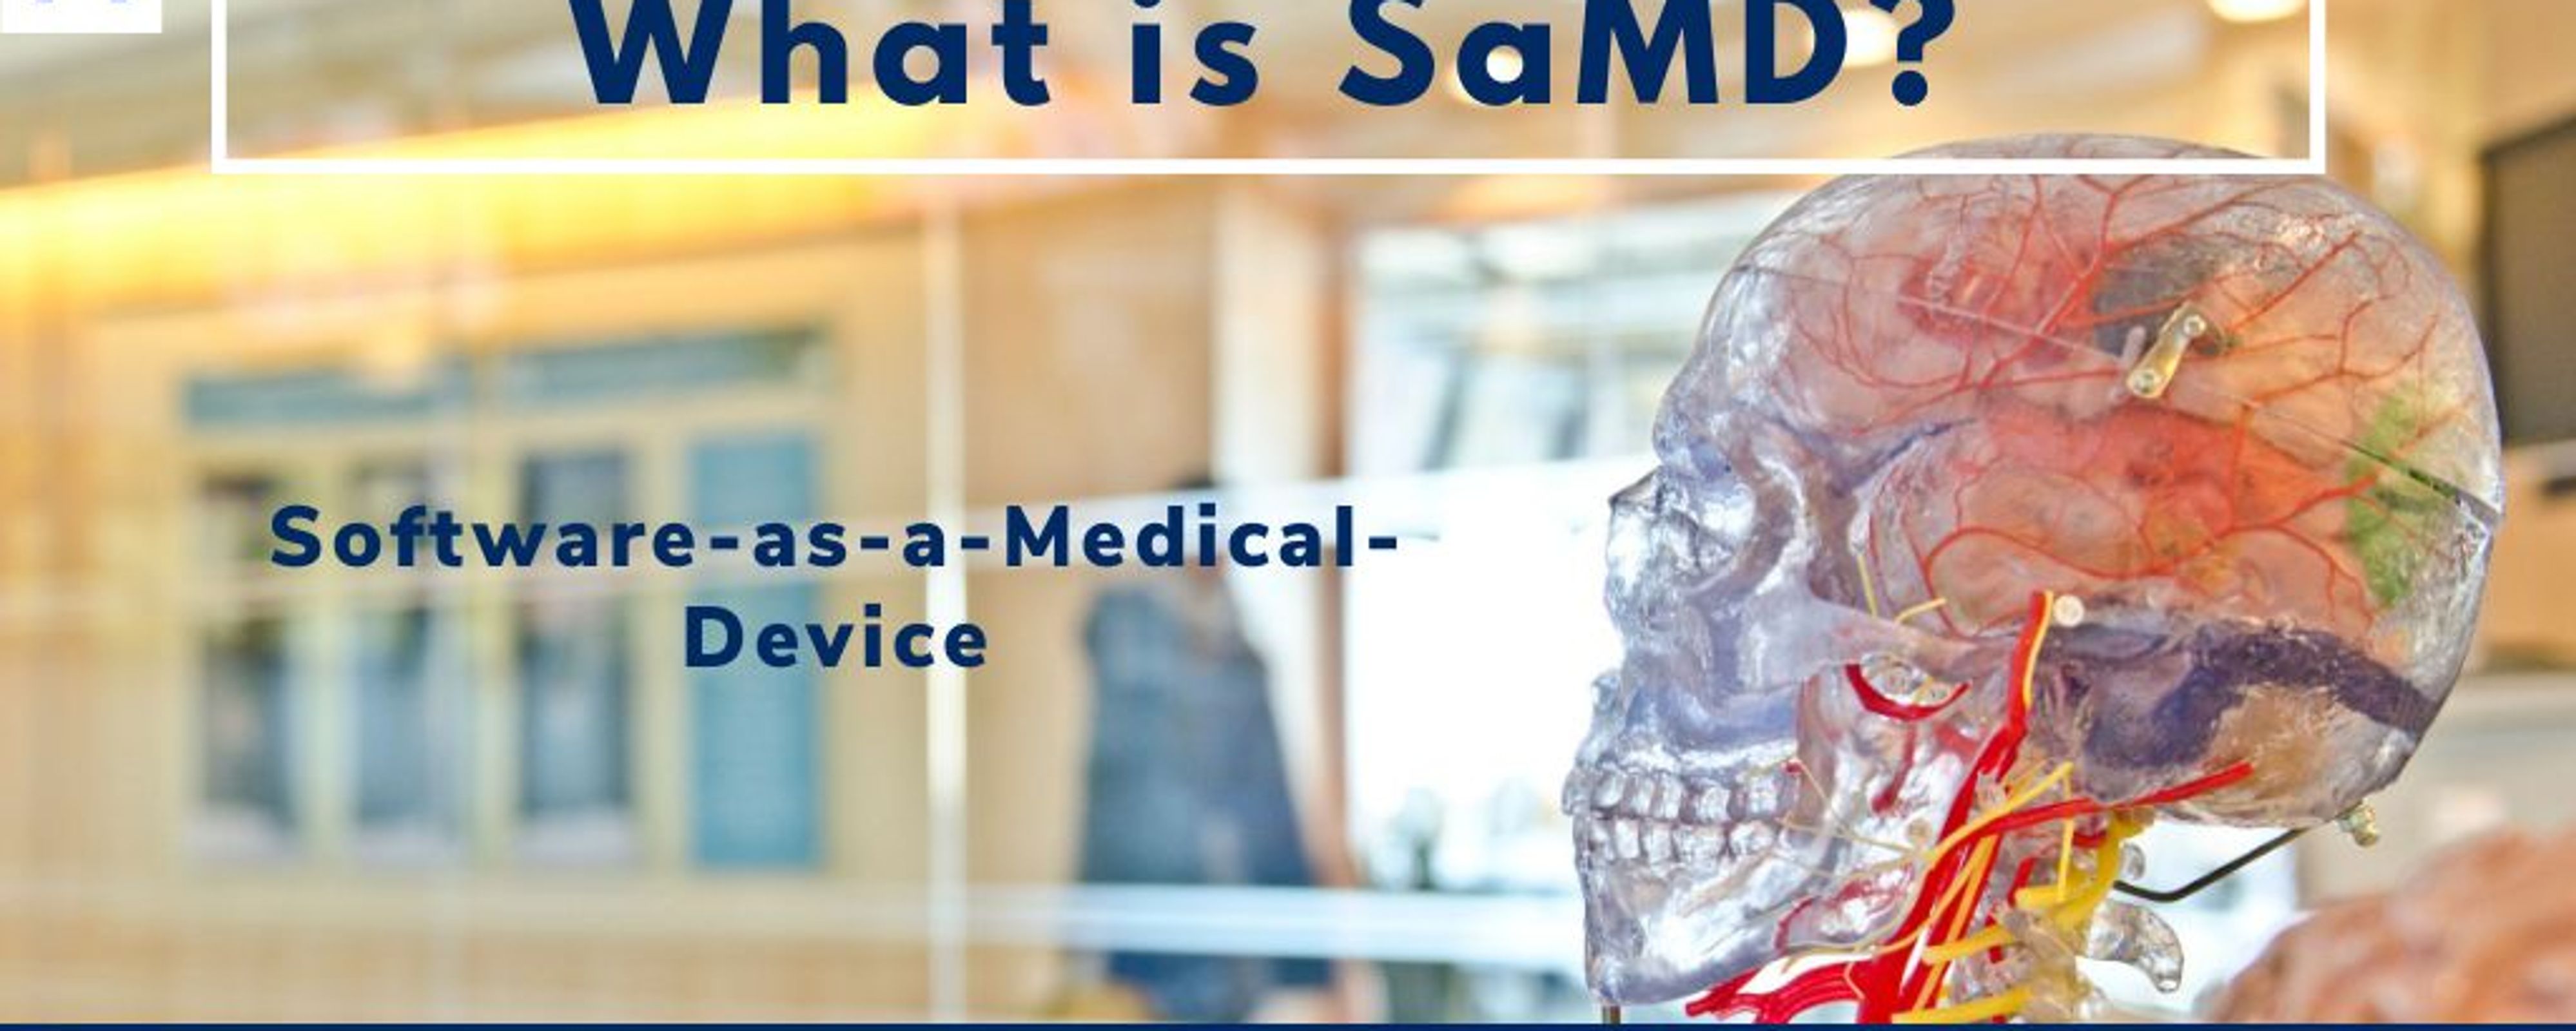 What is SaMD